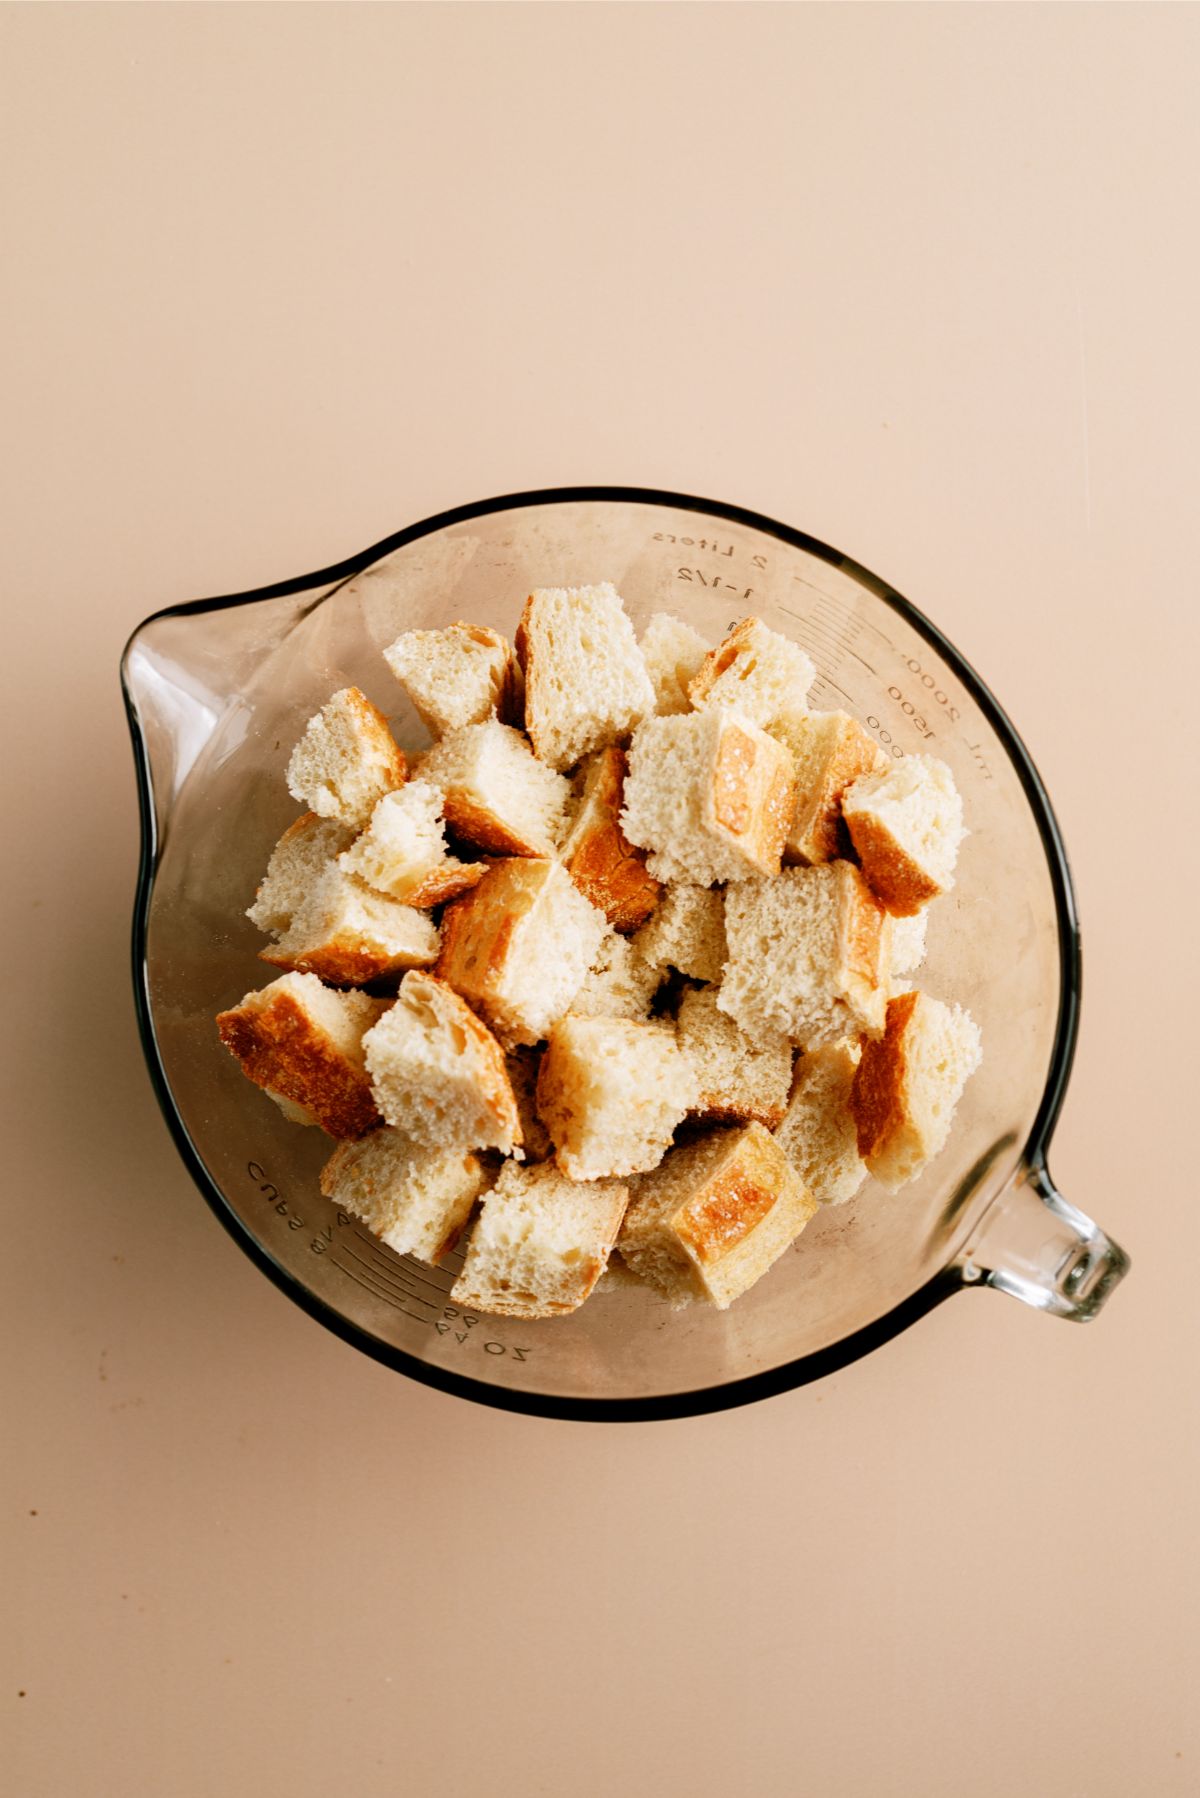 Cubed bread in a mixing bowl